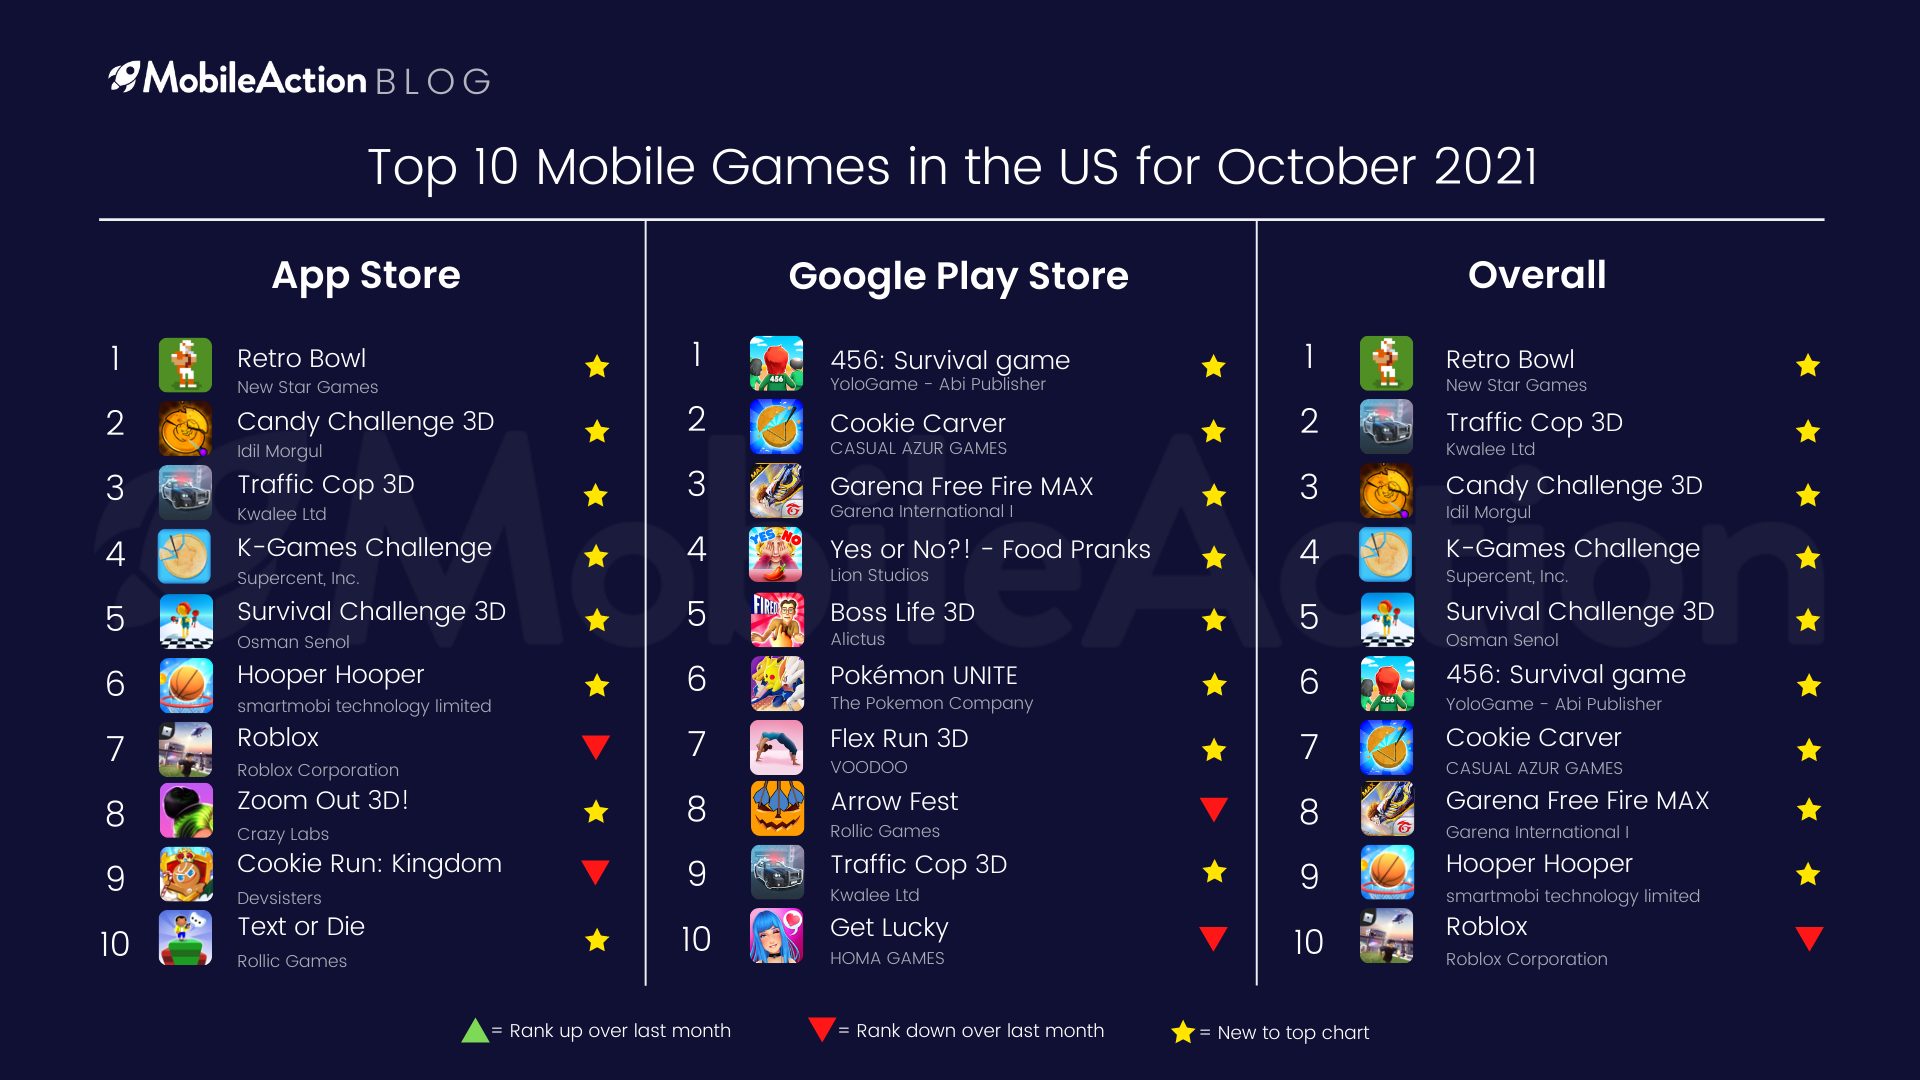 Top 10 Mobile Games in the US for October 2021